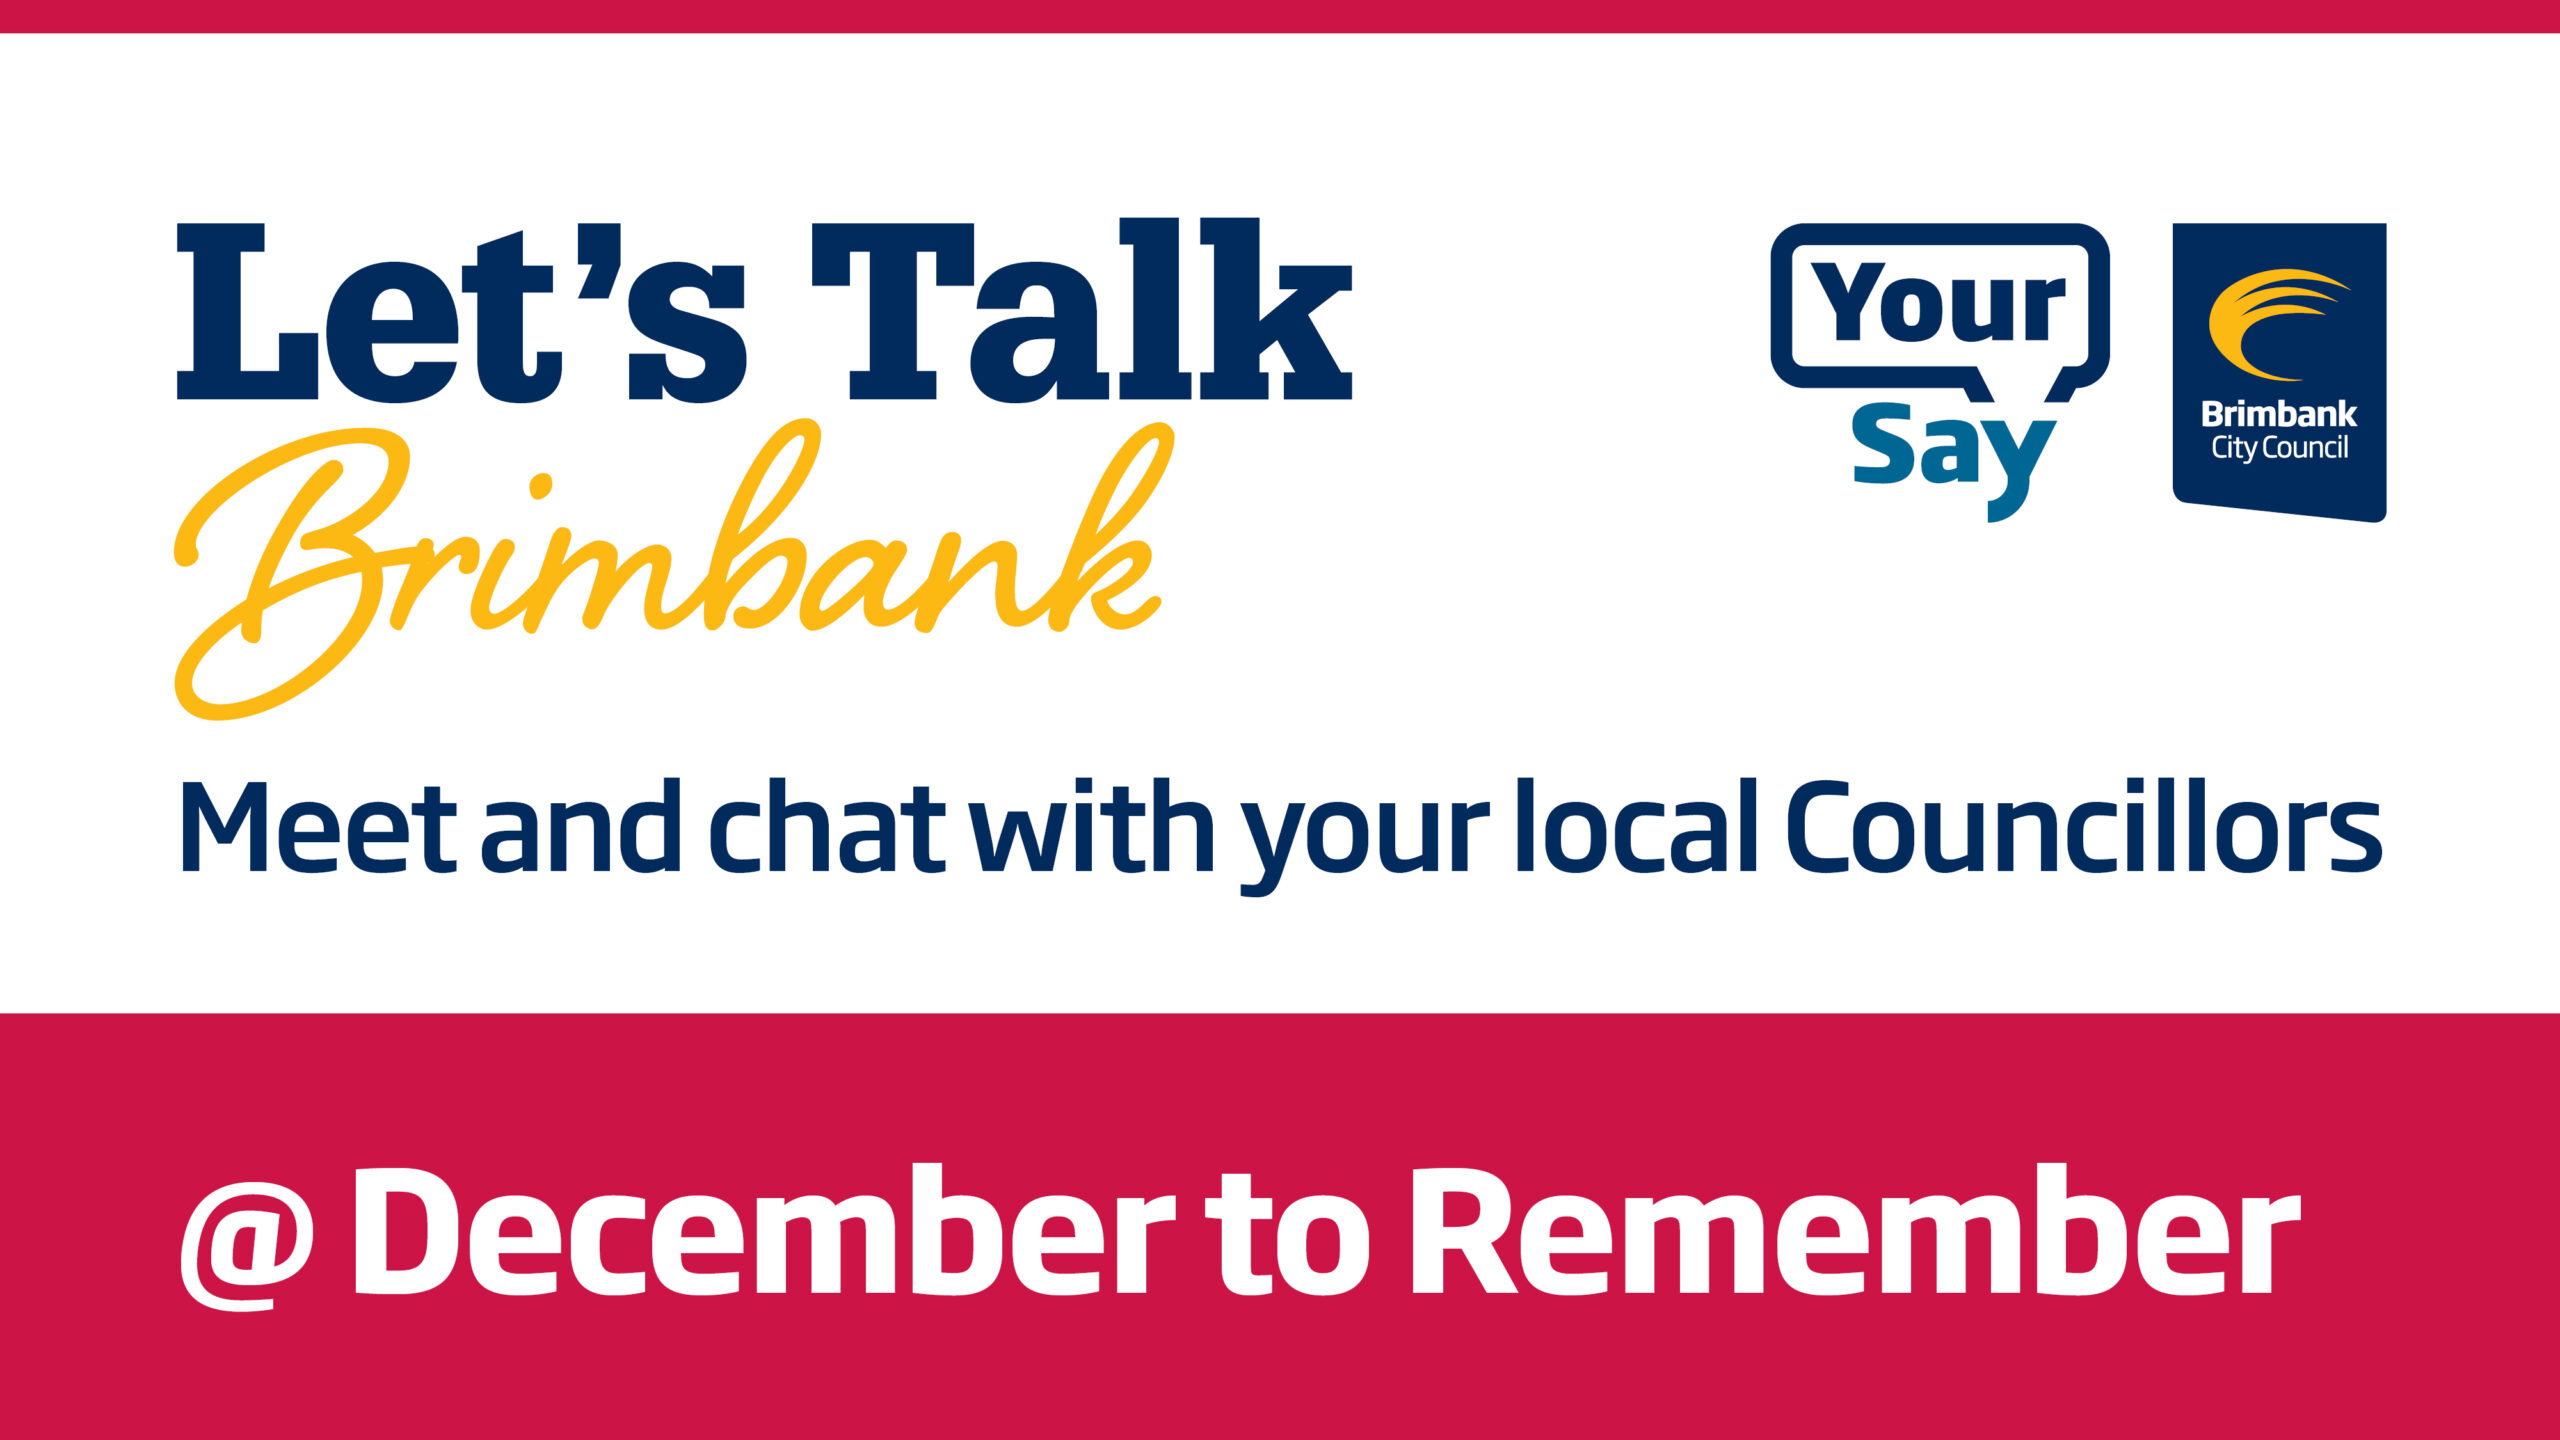 Let’s Talk sessions to meet and greet Brimbank Councillors